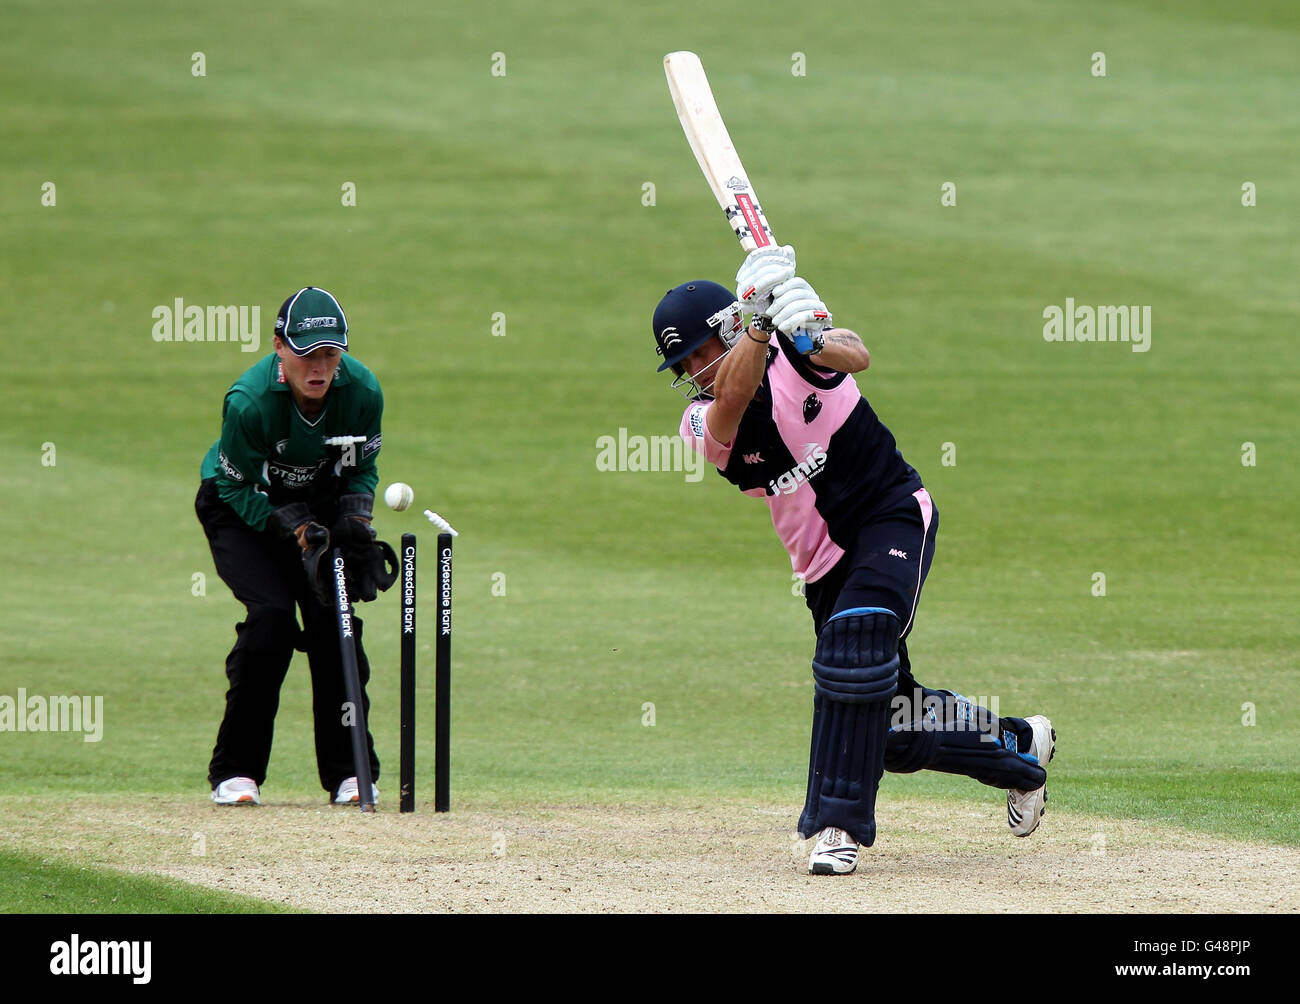 Cricket - Clydesdale Bank 40 - Worcestershire v Middlesex - New Road. Middlesex's Gareth Berg is bowled by Worcestershire's Moeen Ali for 31 runs during the Clydesdale Bank 40 match at New Road, Worcester. Stock Photo